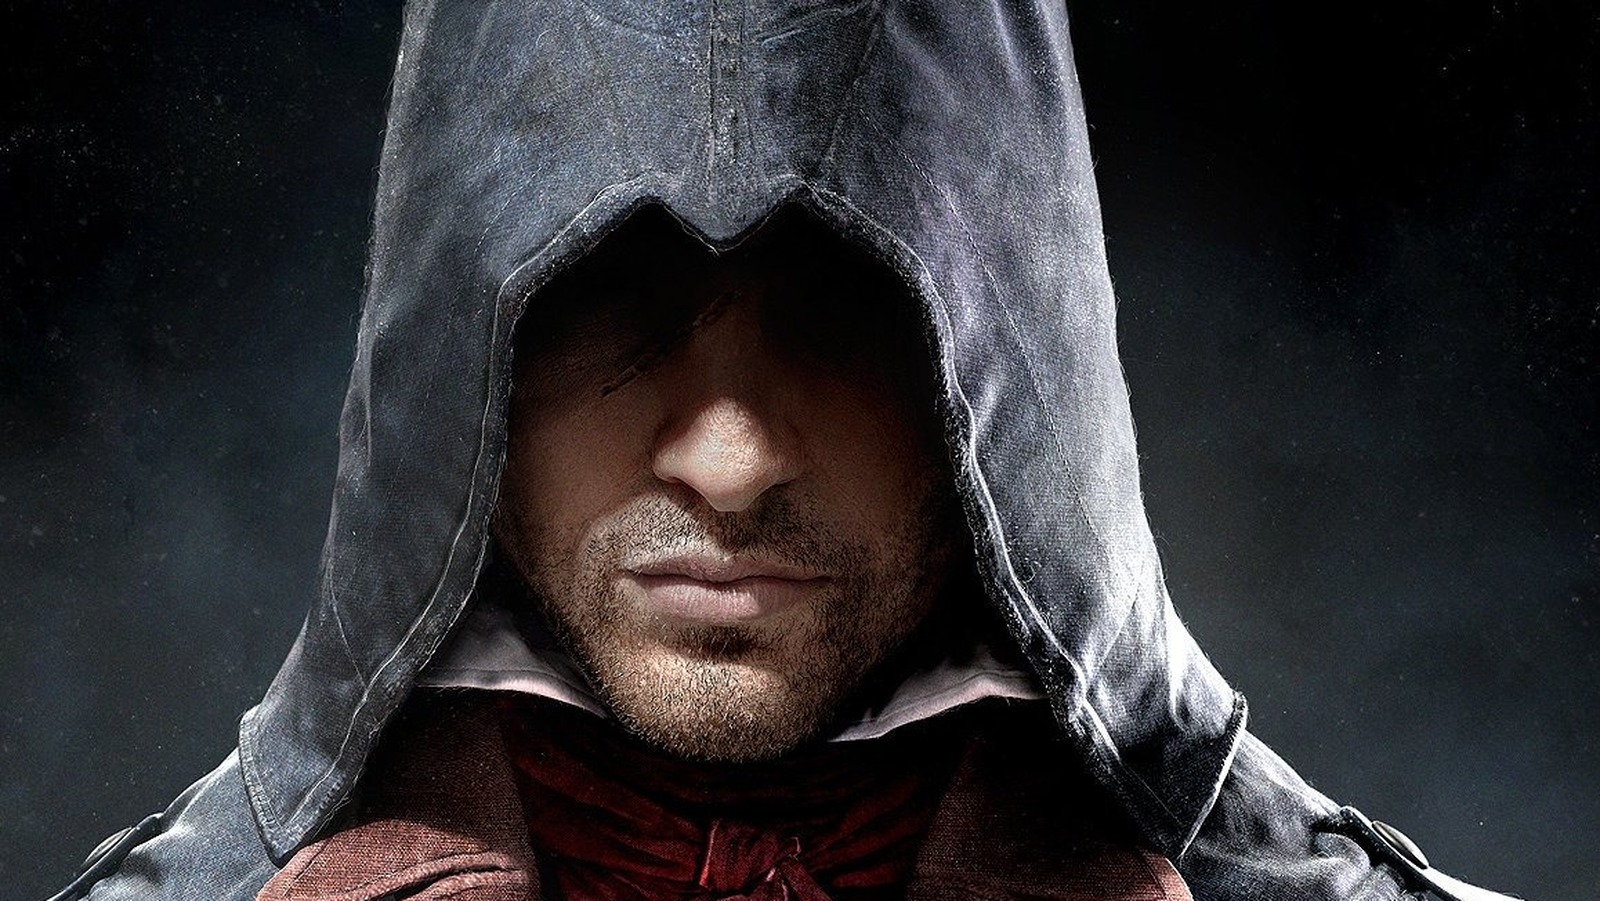 Best Assassin's Creed Games (According To Metacritic)